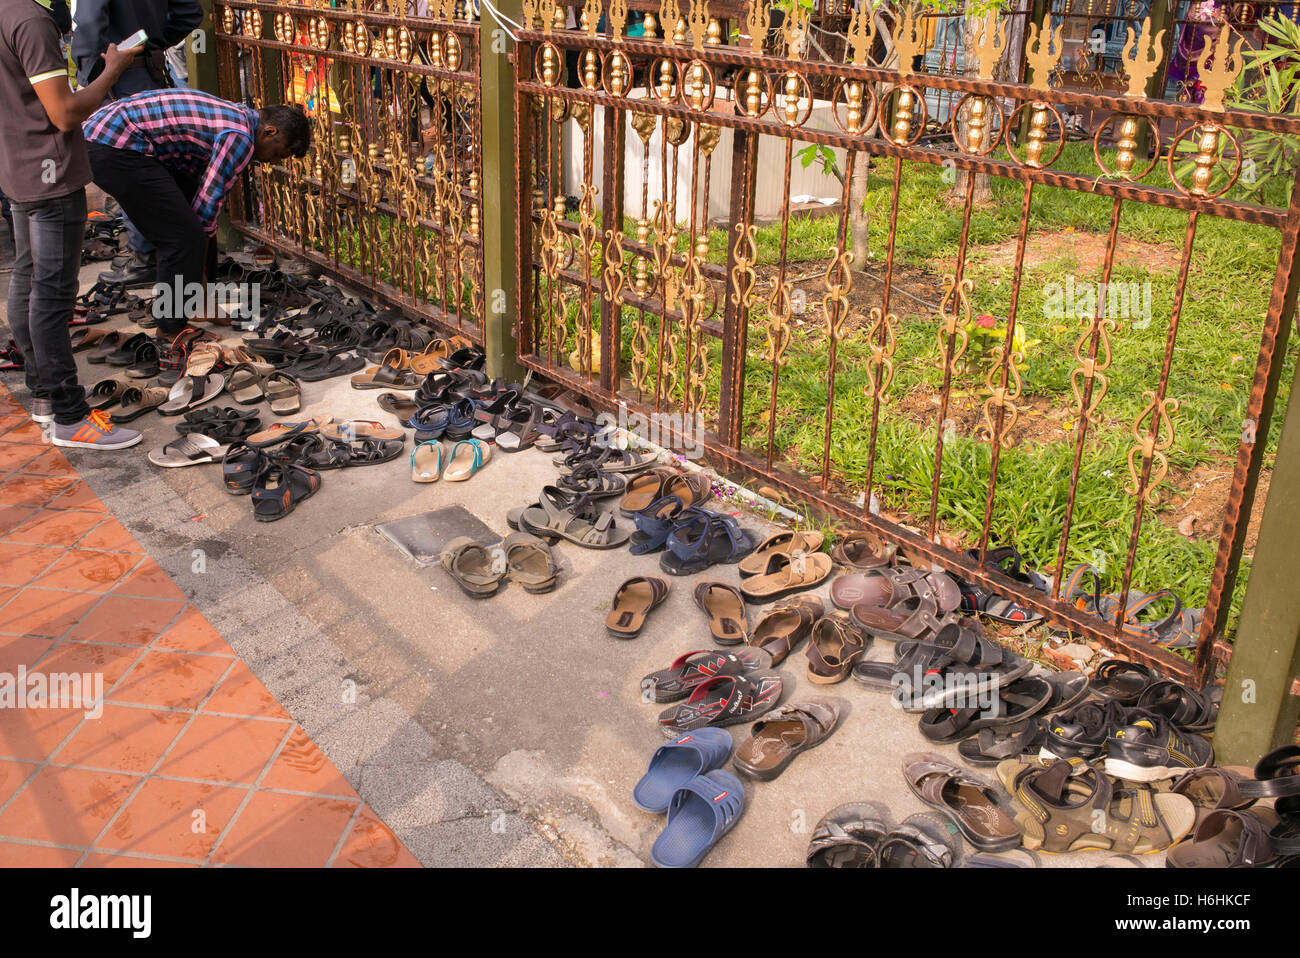 Worshipers leave their shoes outside a temple during the Festival of Diwali, or Deepavali, in Little India, Singapore Stock Photo